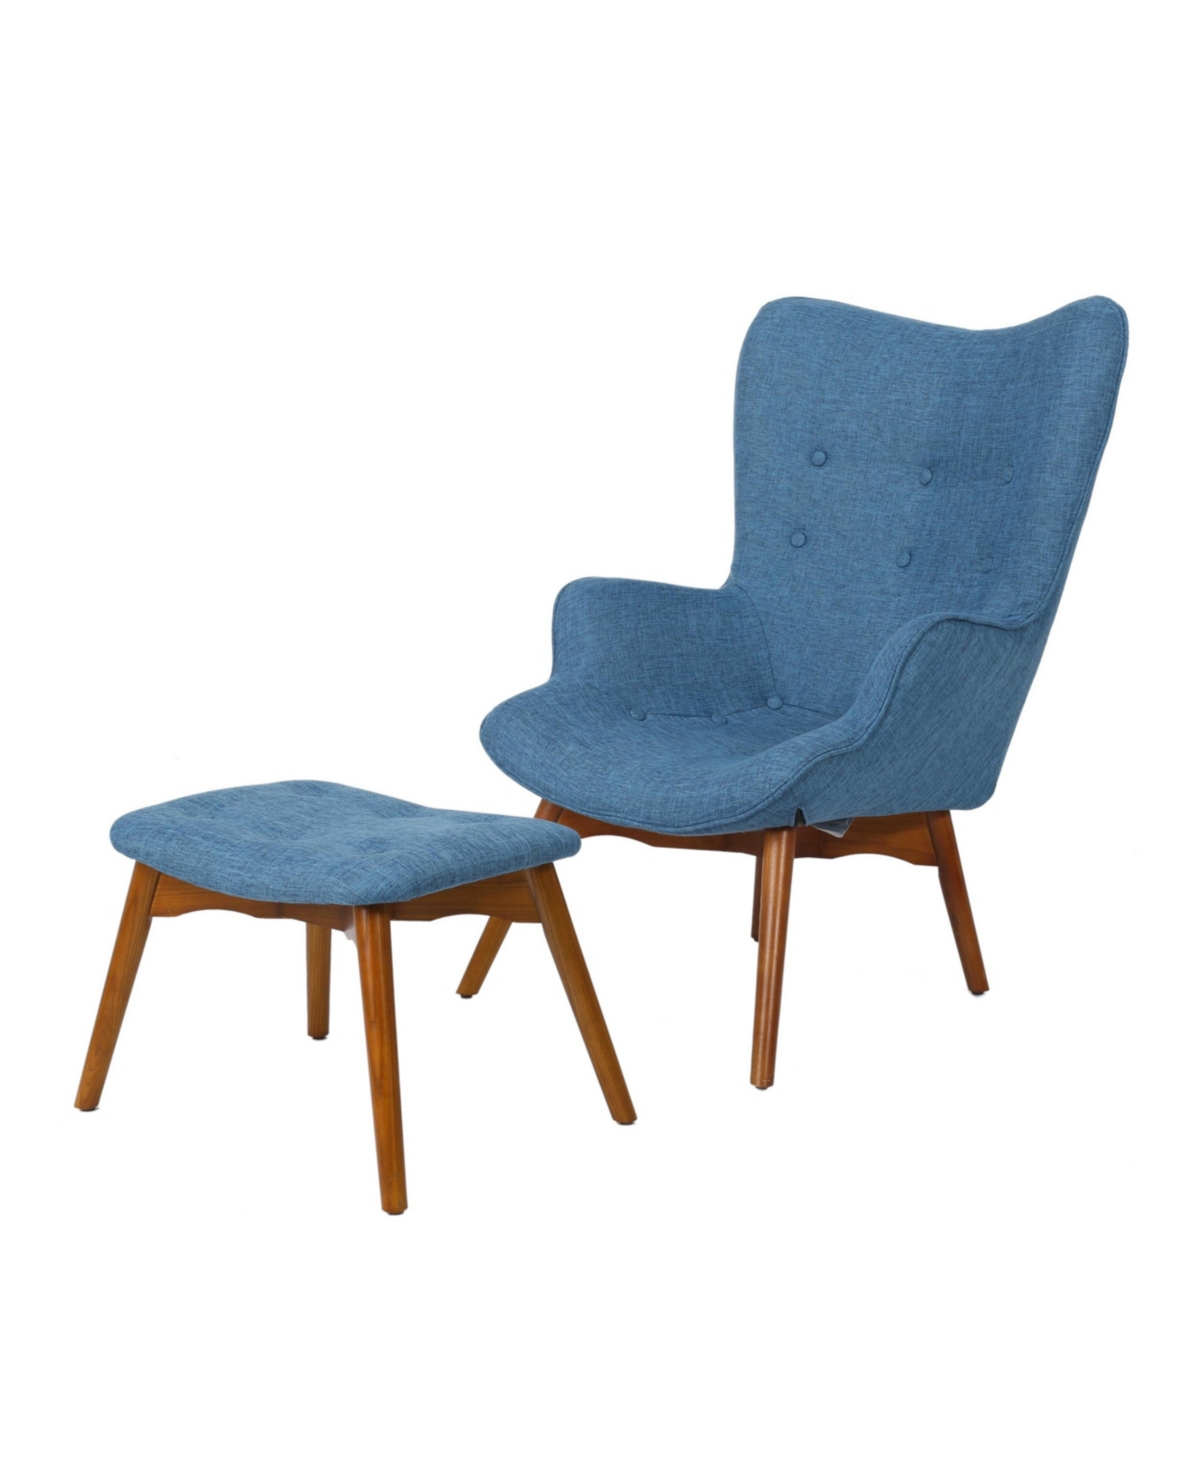 Noble House Hariata Mid-century Modern Wingback Chair And Ottoman Set, 2 Piece In Muted Blue